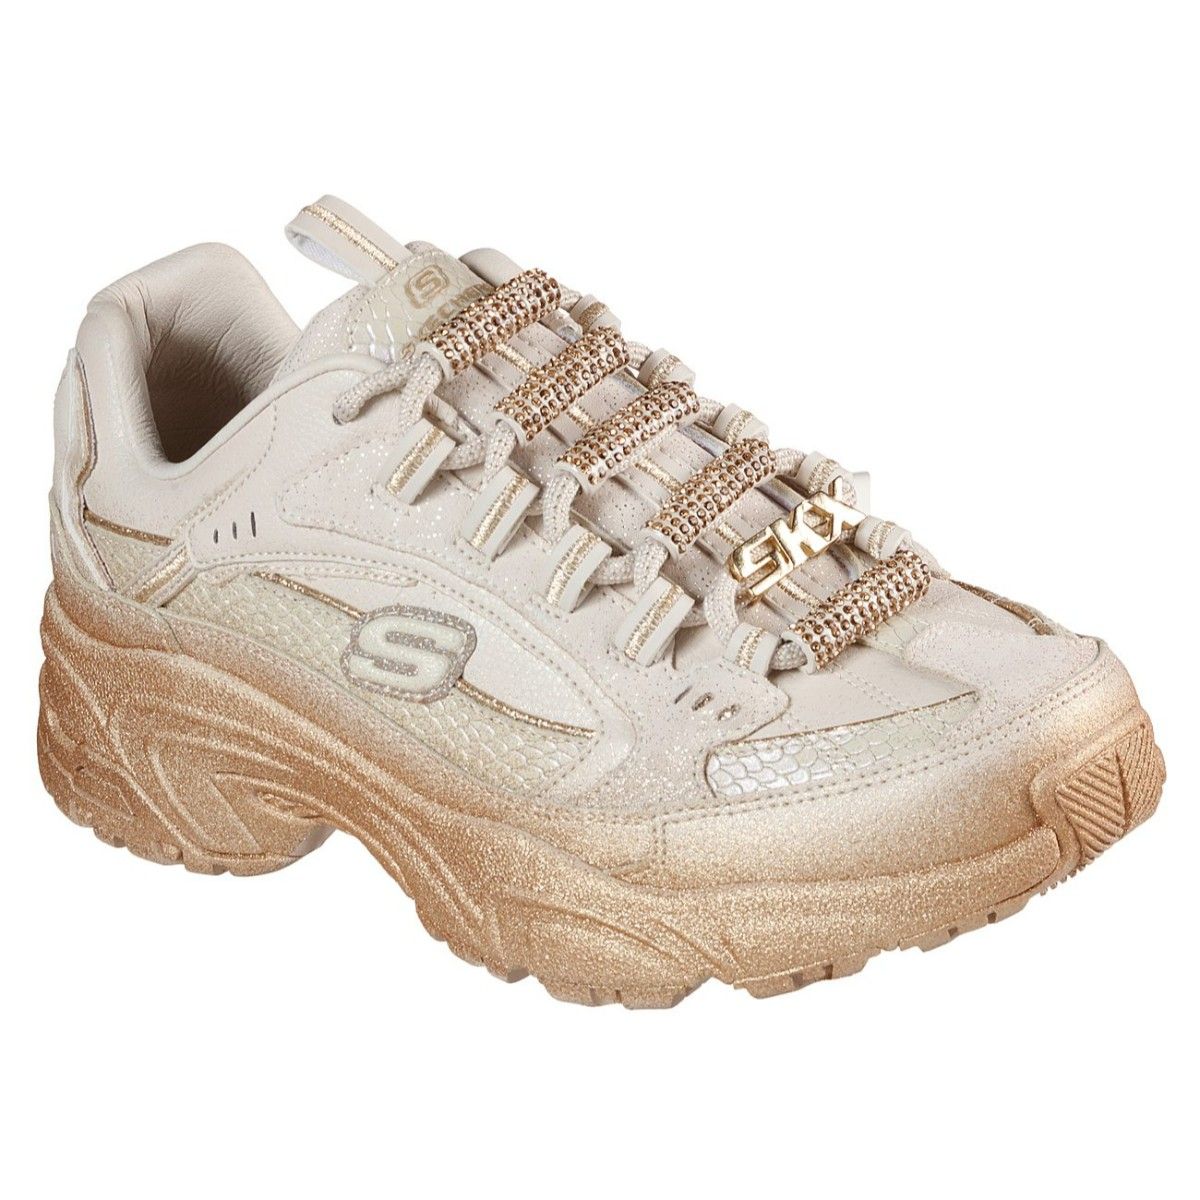 SKECHERS Stamina-gold Chic Natural Sneakers: Buy SKECHERS Stamina-gold Sneakers Online at Best in India | Nykaa